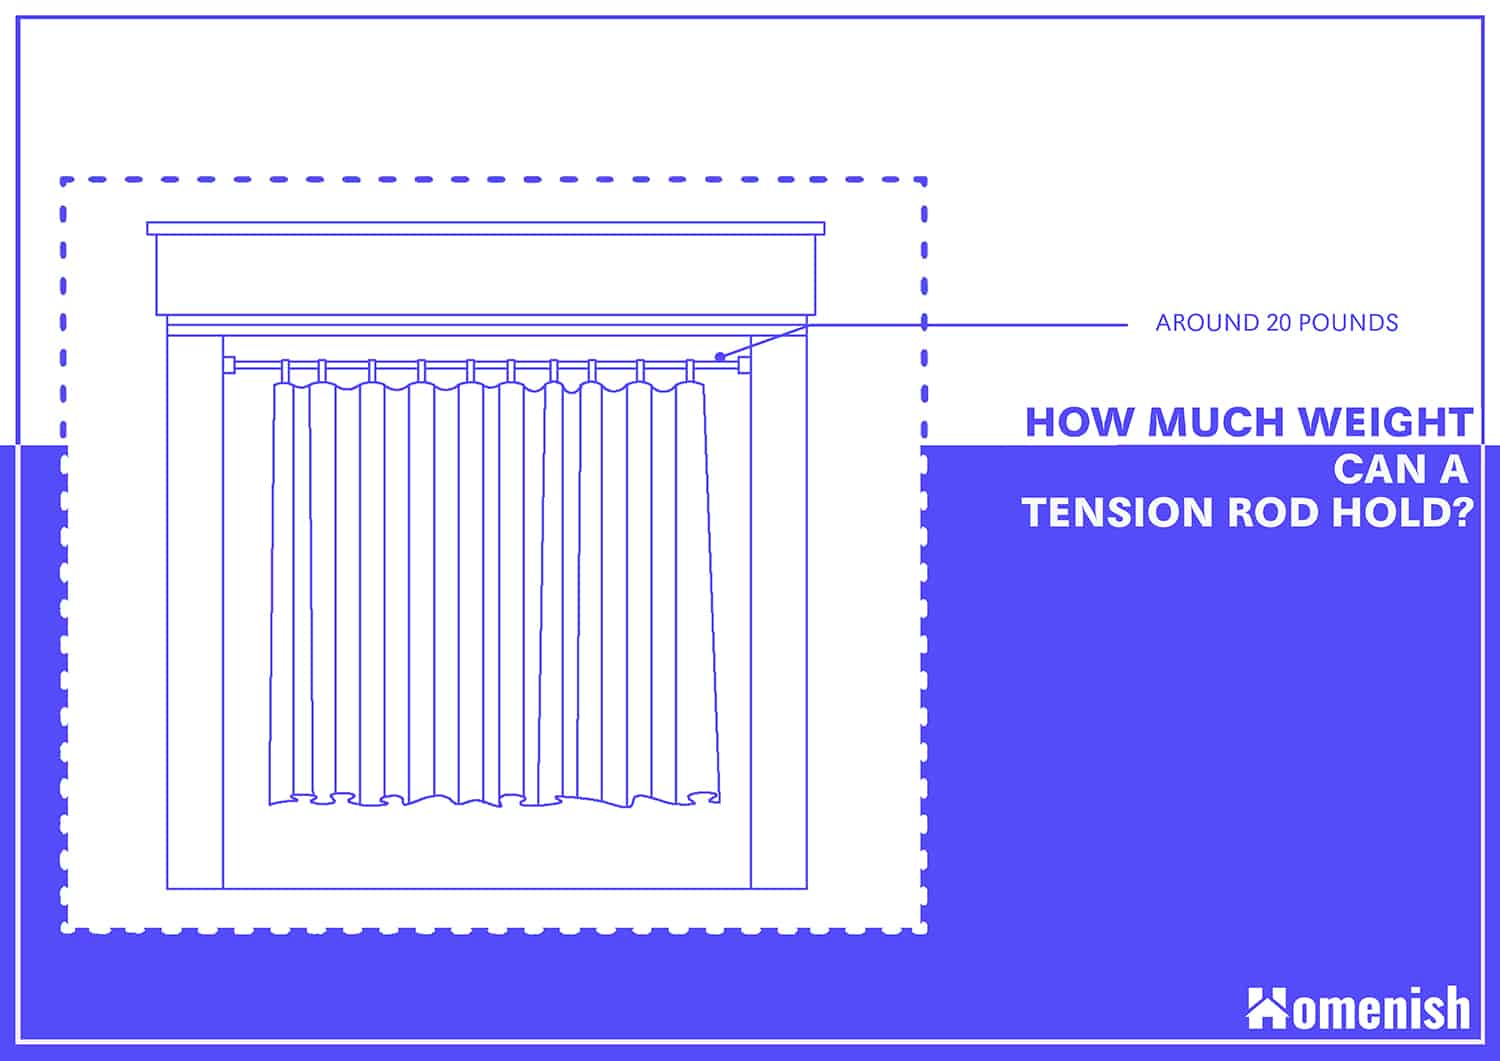 How Much Weight Can a Tension Rod Hold